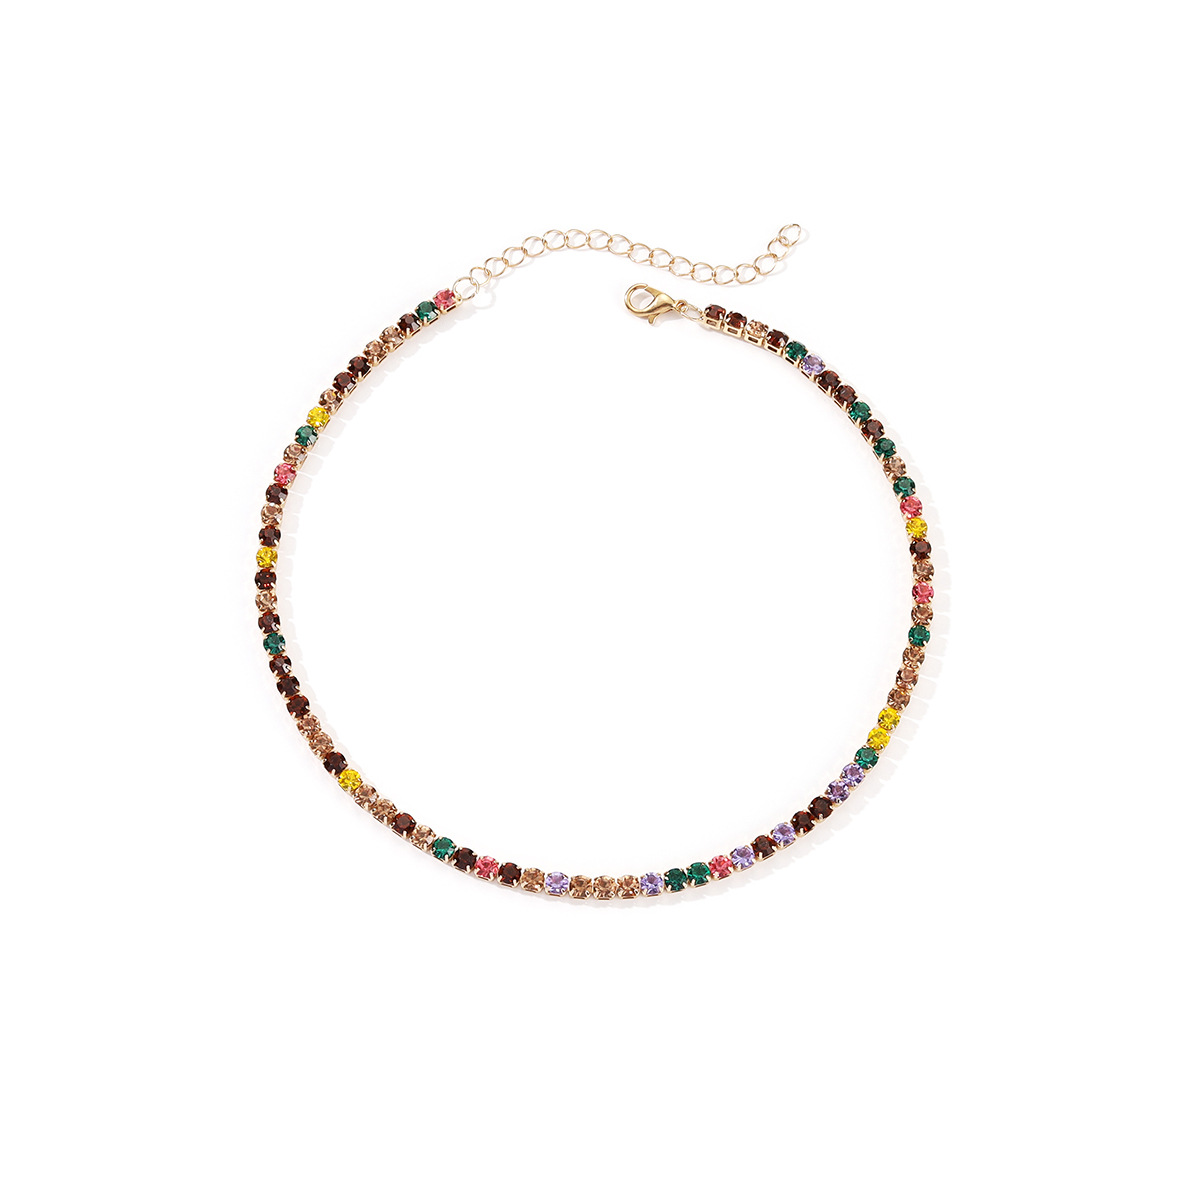 1:Colorful gold necklace